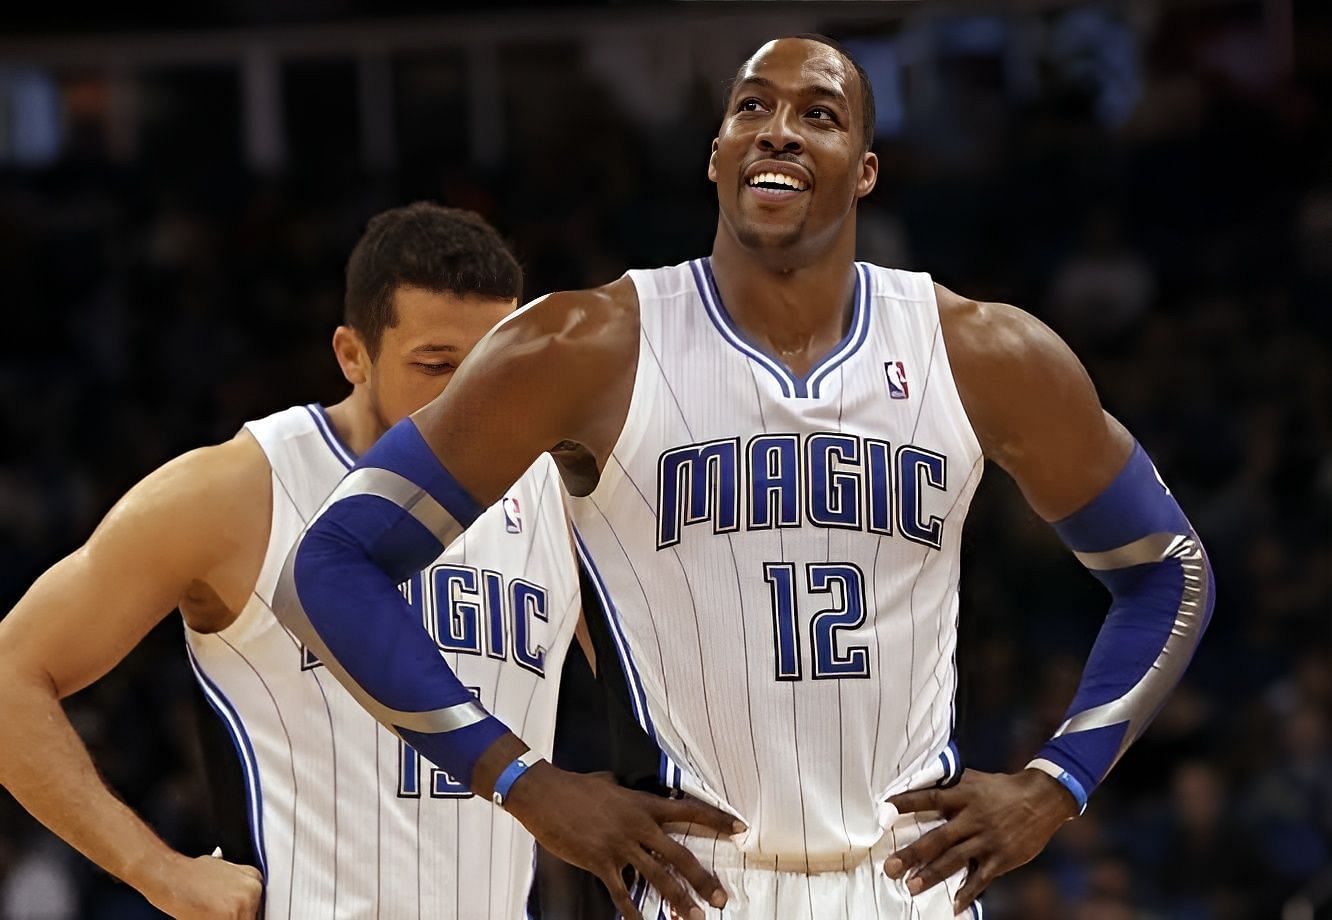 The NBA world agrees -- Dwight Howard is the biggest snub from the